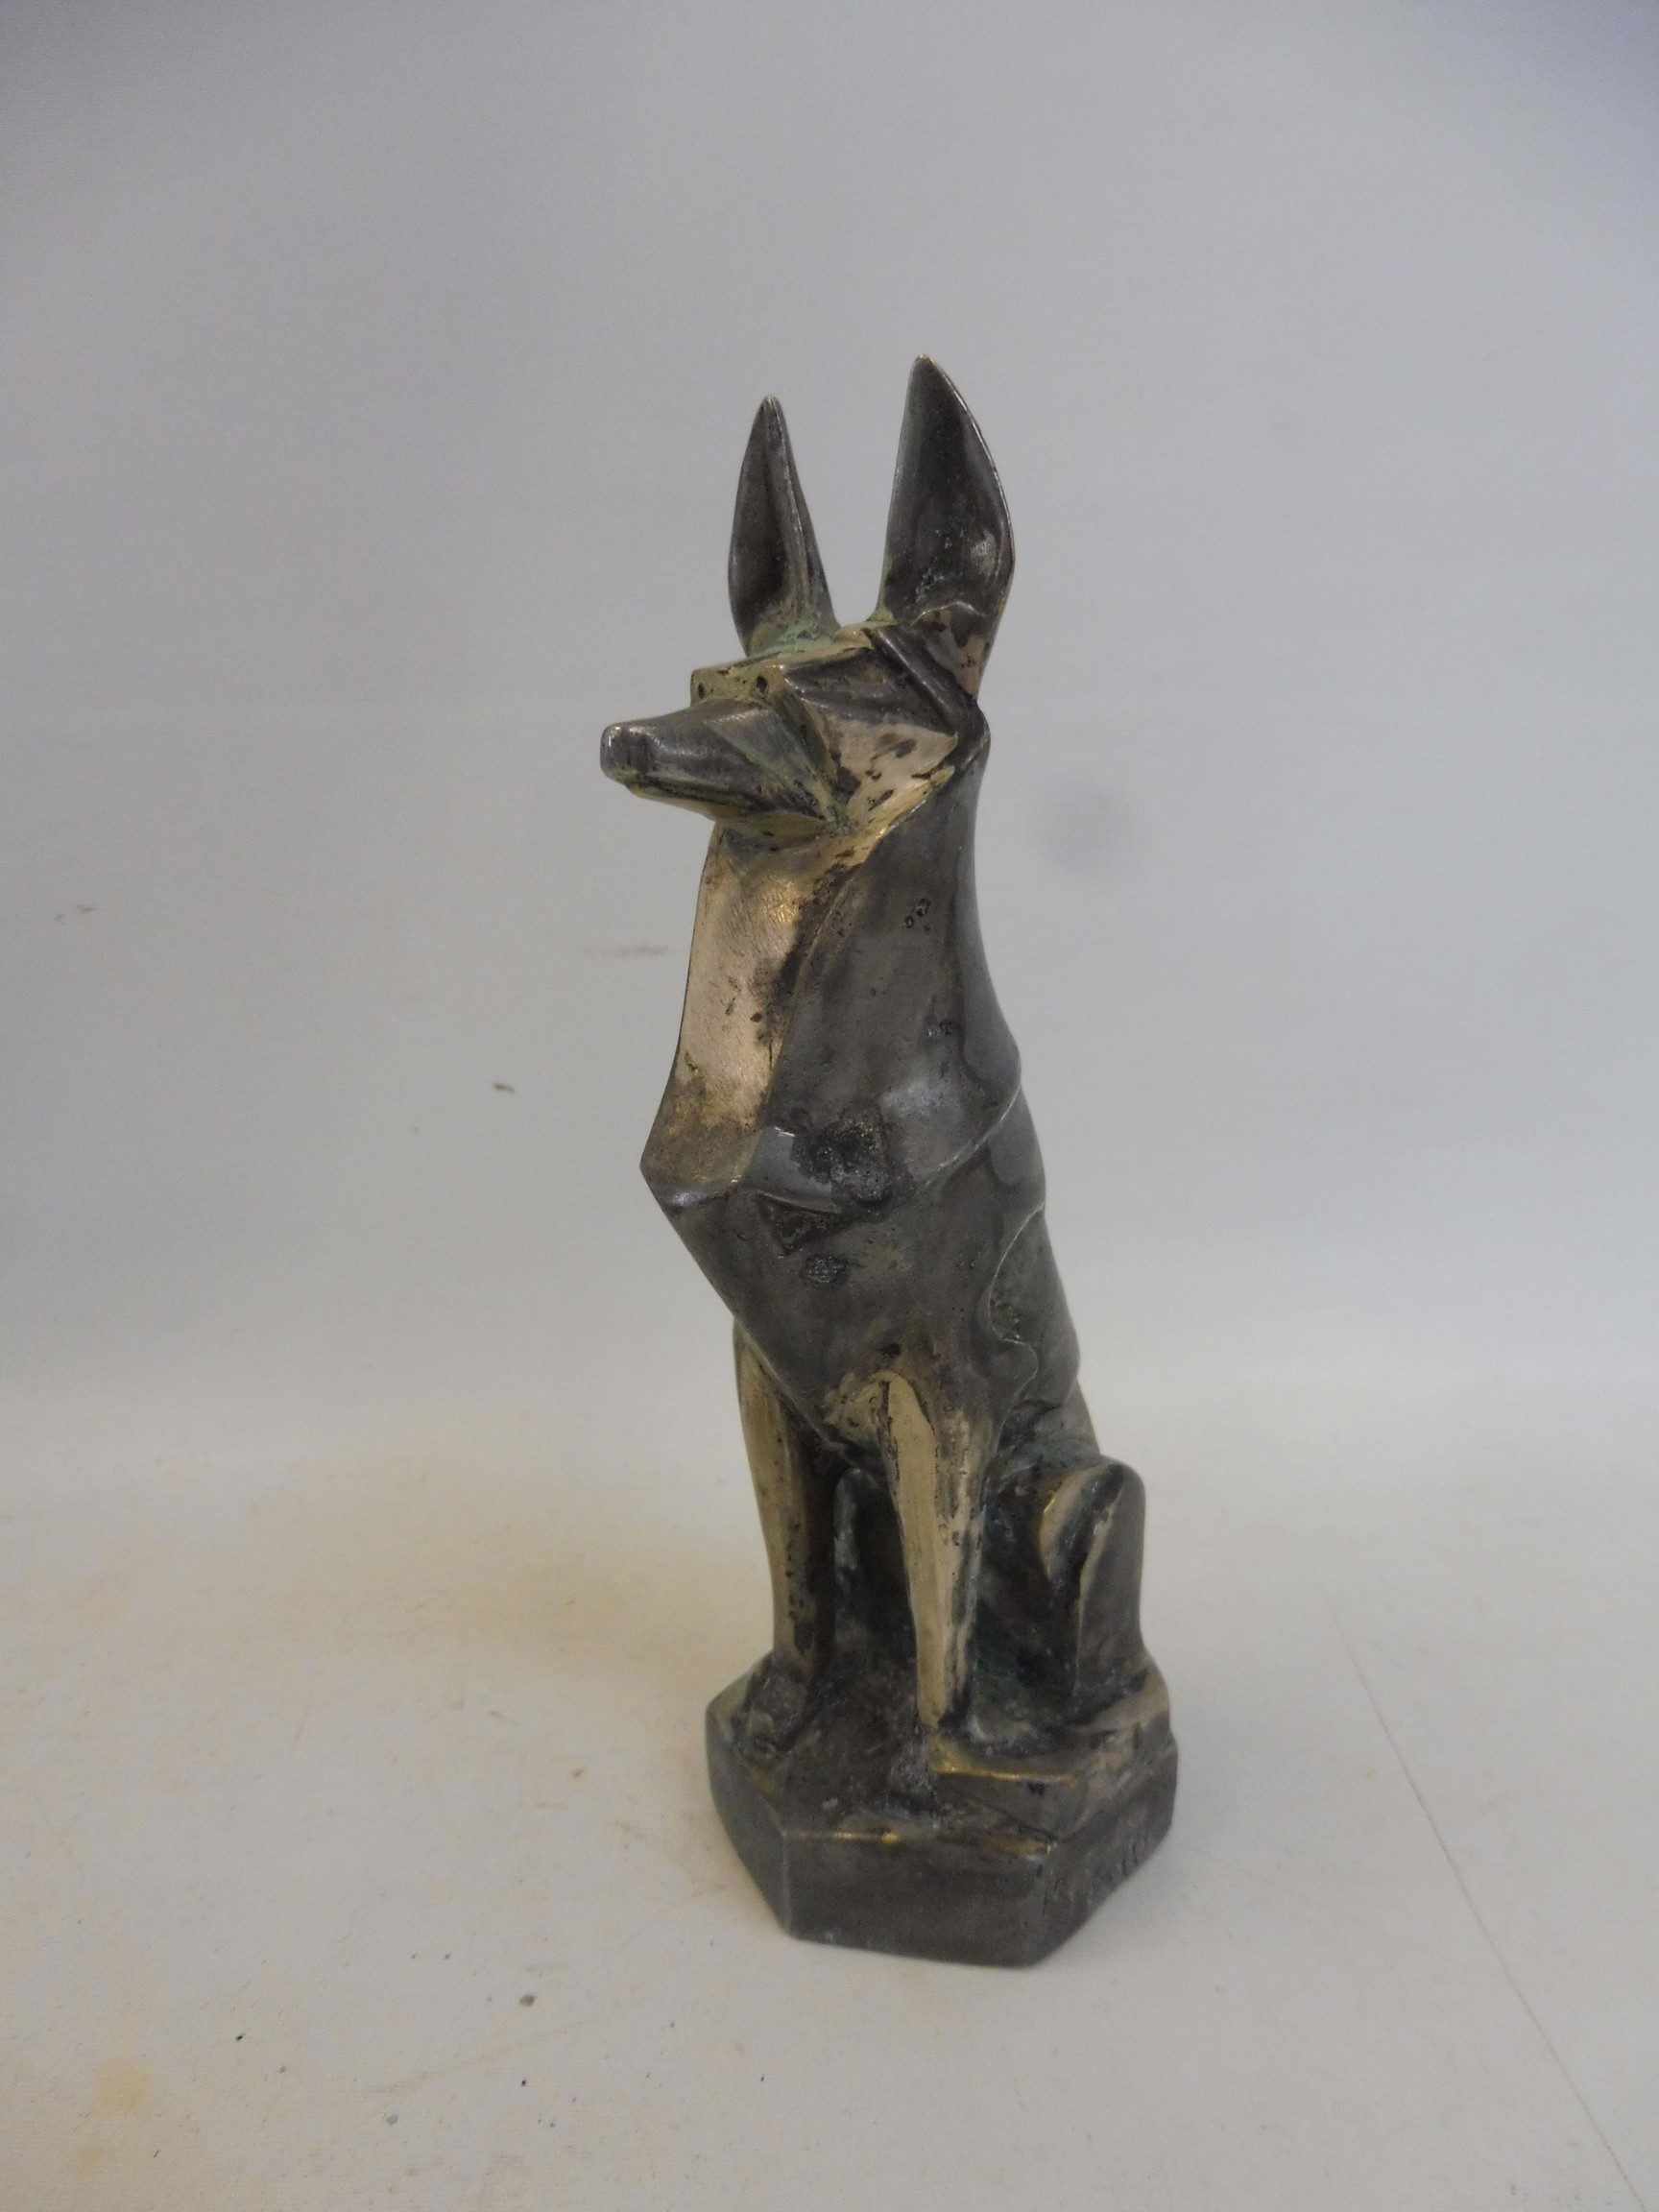 Jacques Cartier sitting alsatian car mascot, as photographed and described in Michael Legrand's book